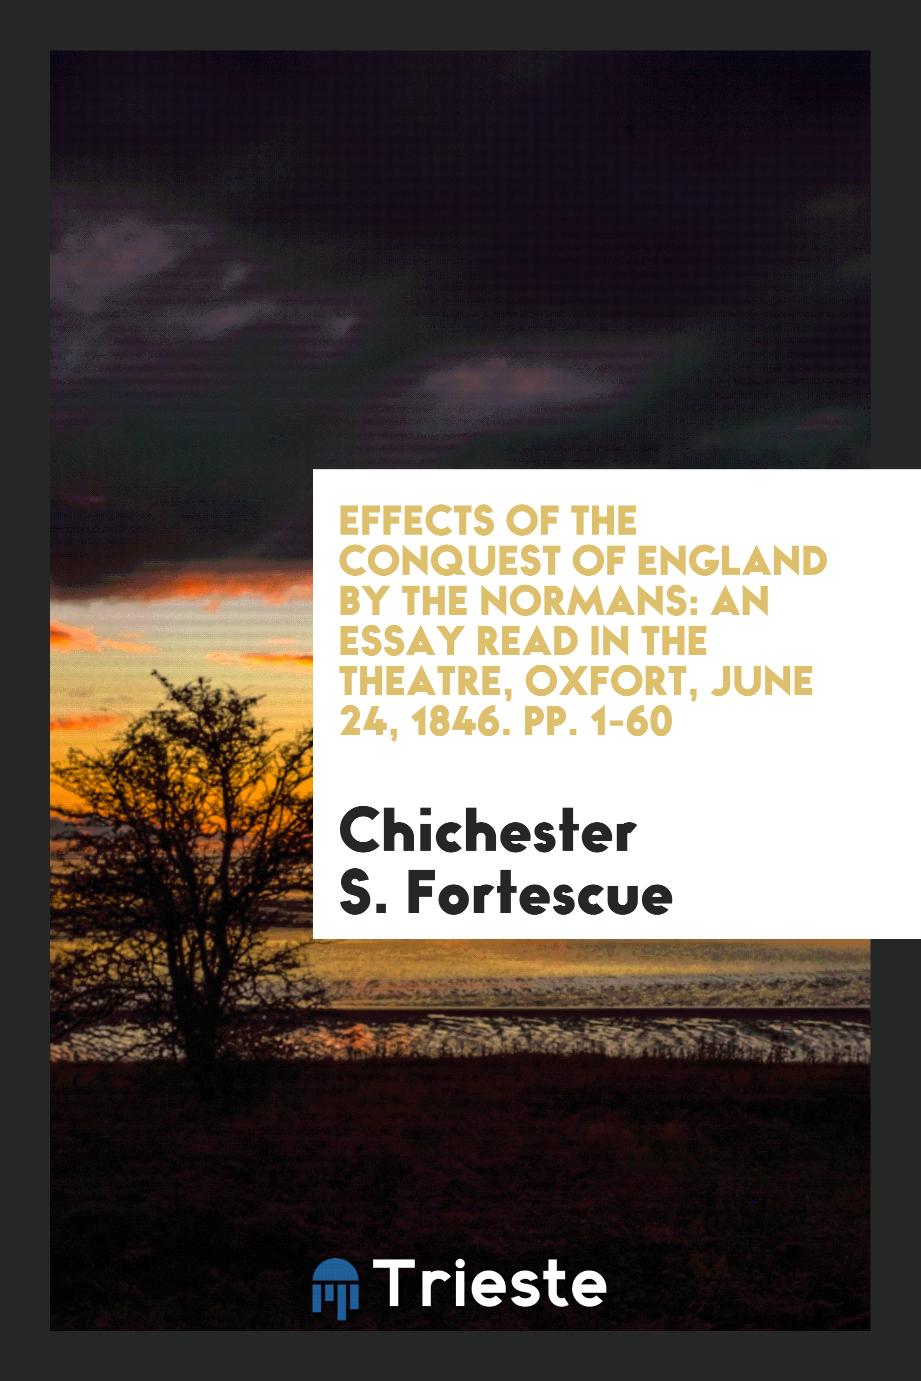 Effects of the Conquest of England by the Normans: An Essay Read in the theatre, Oxfort, June 24, 1846. pp. 1-60